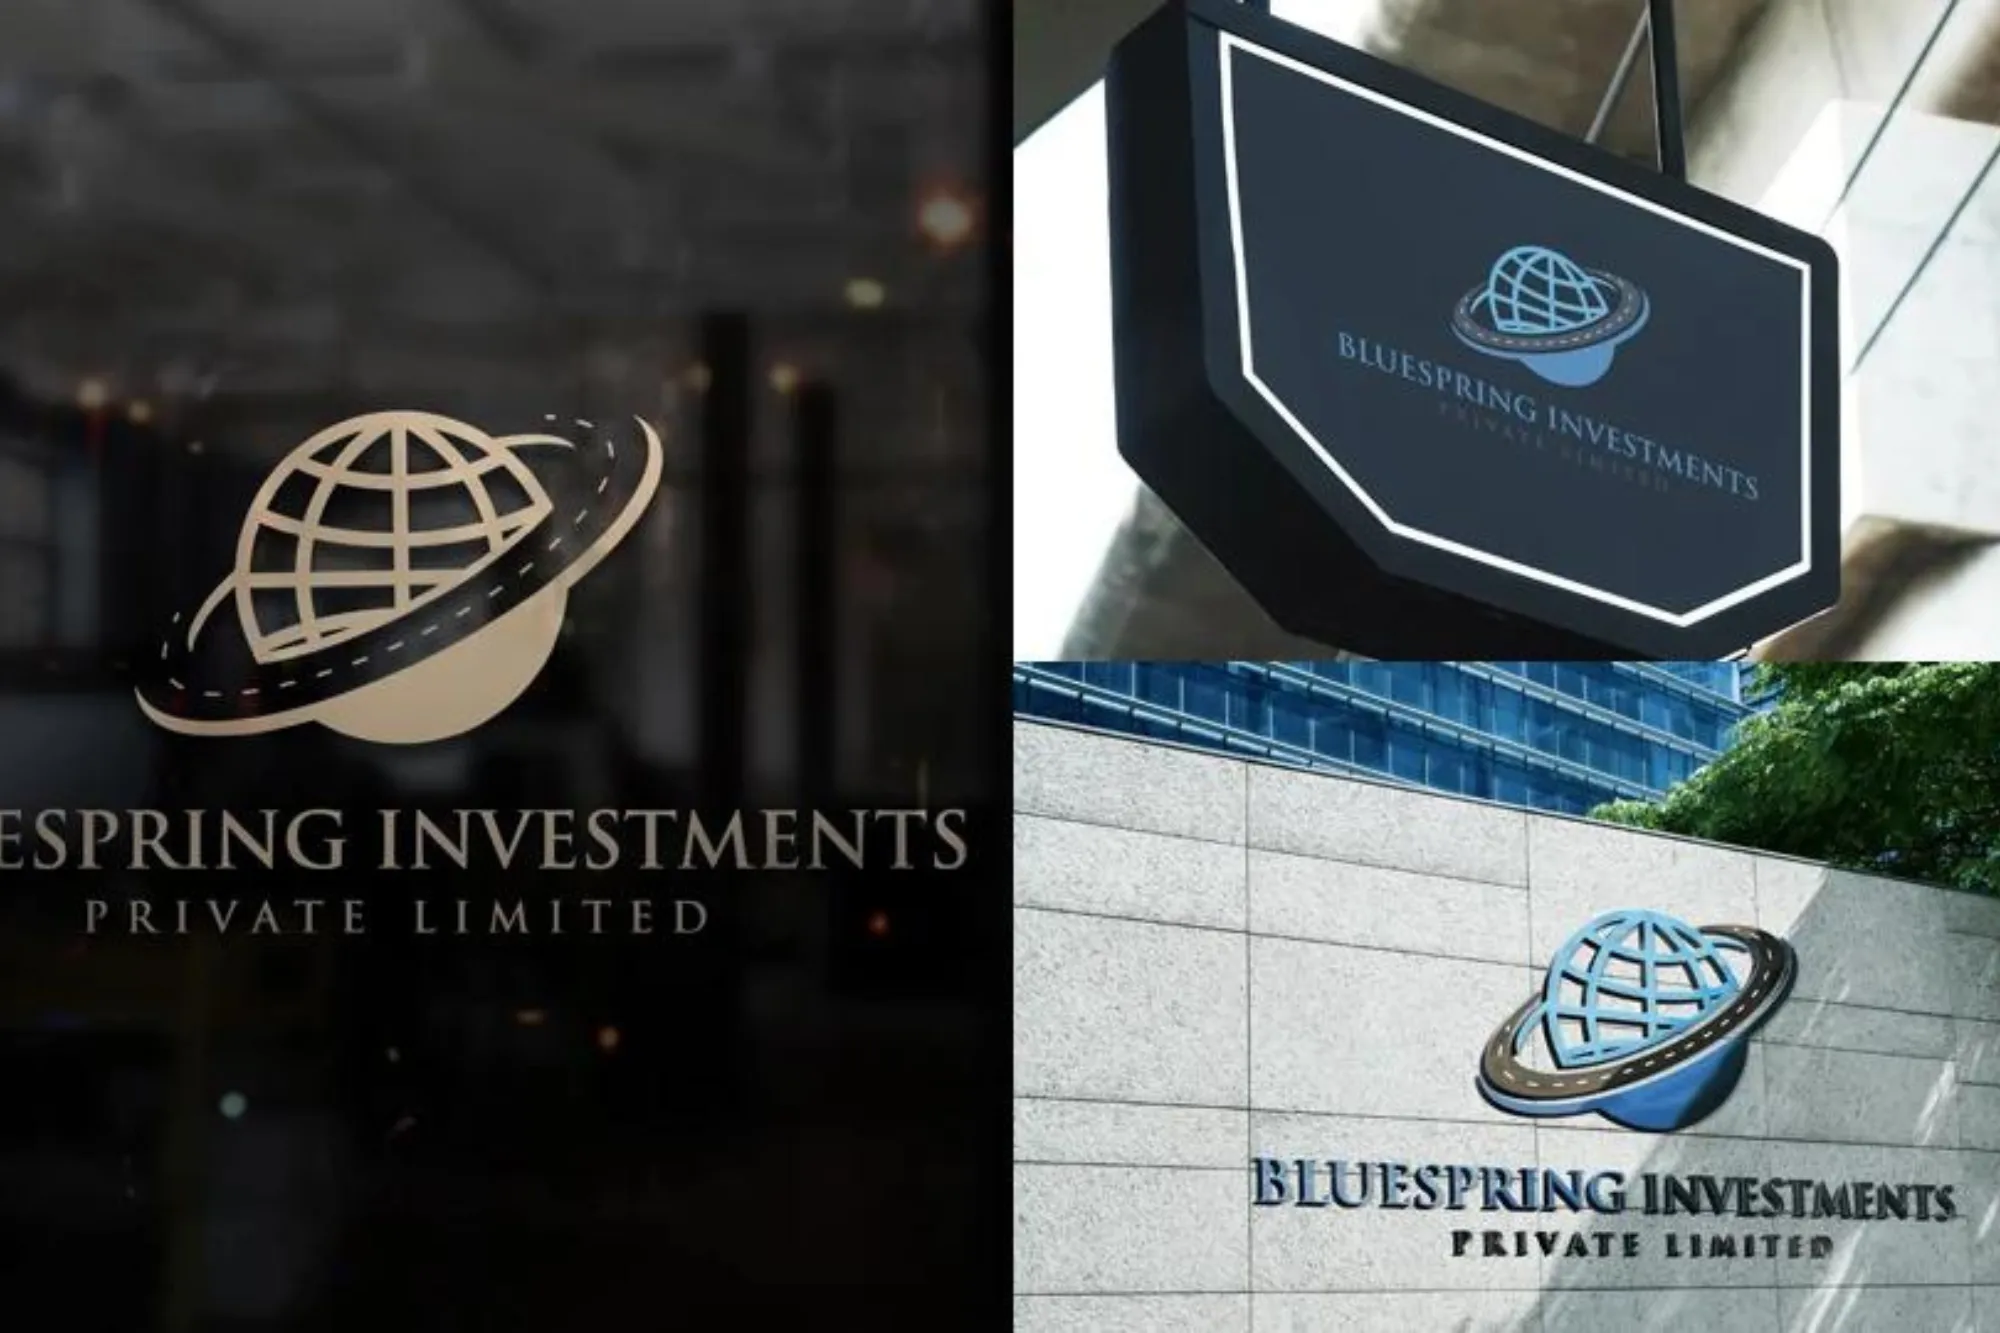 Bluespring Investments